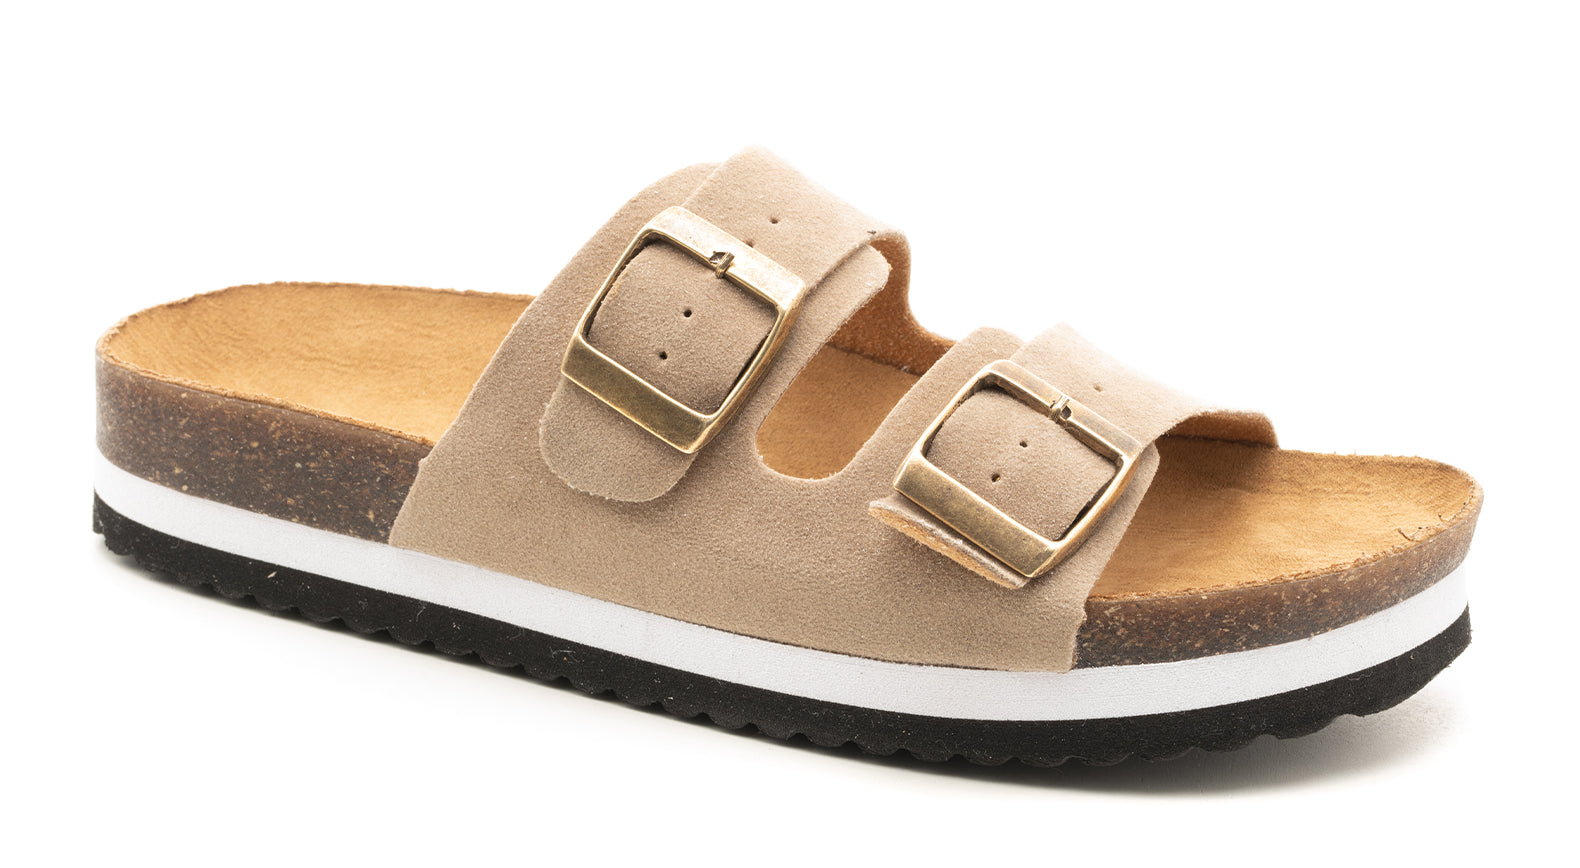 CORKY'S beach babe tan suede sandals